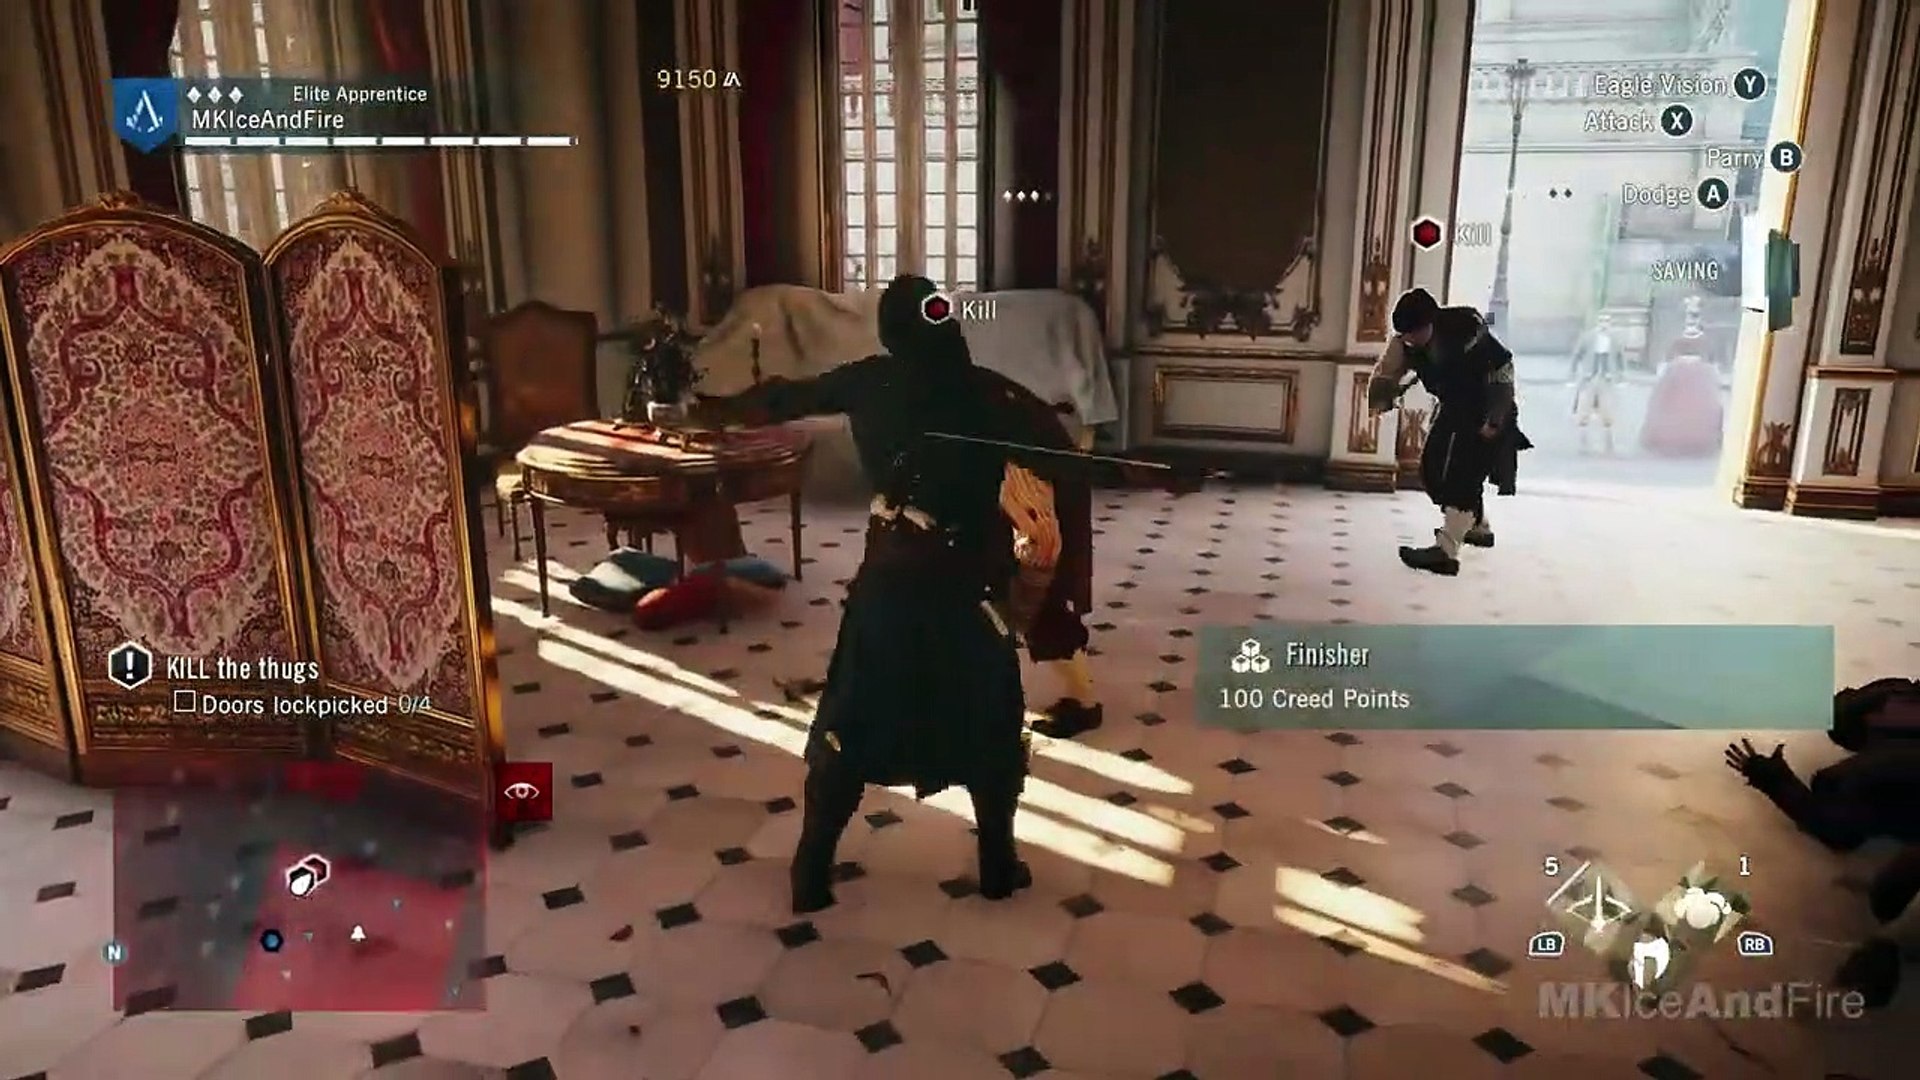 Assassin's Creed Unity Full Game Walkthrough Gameplay (4K 60FPS) No  Commentary 